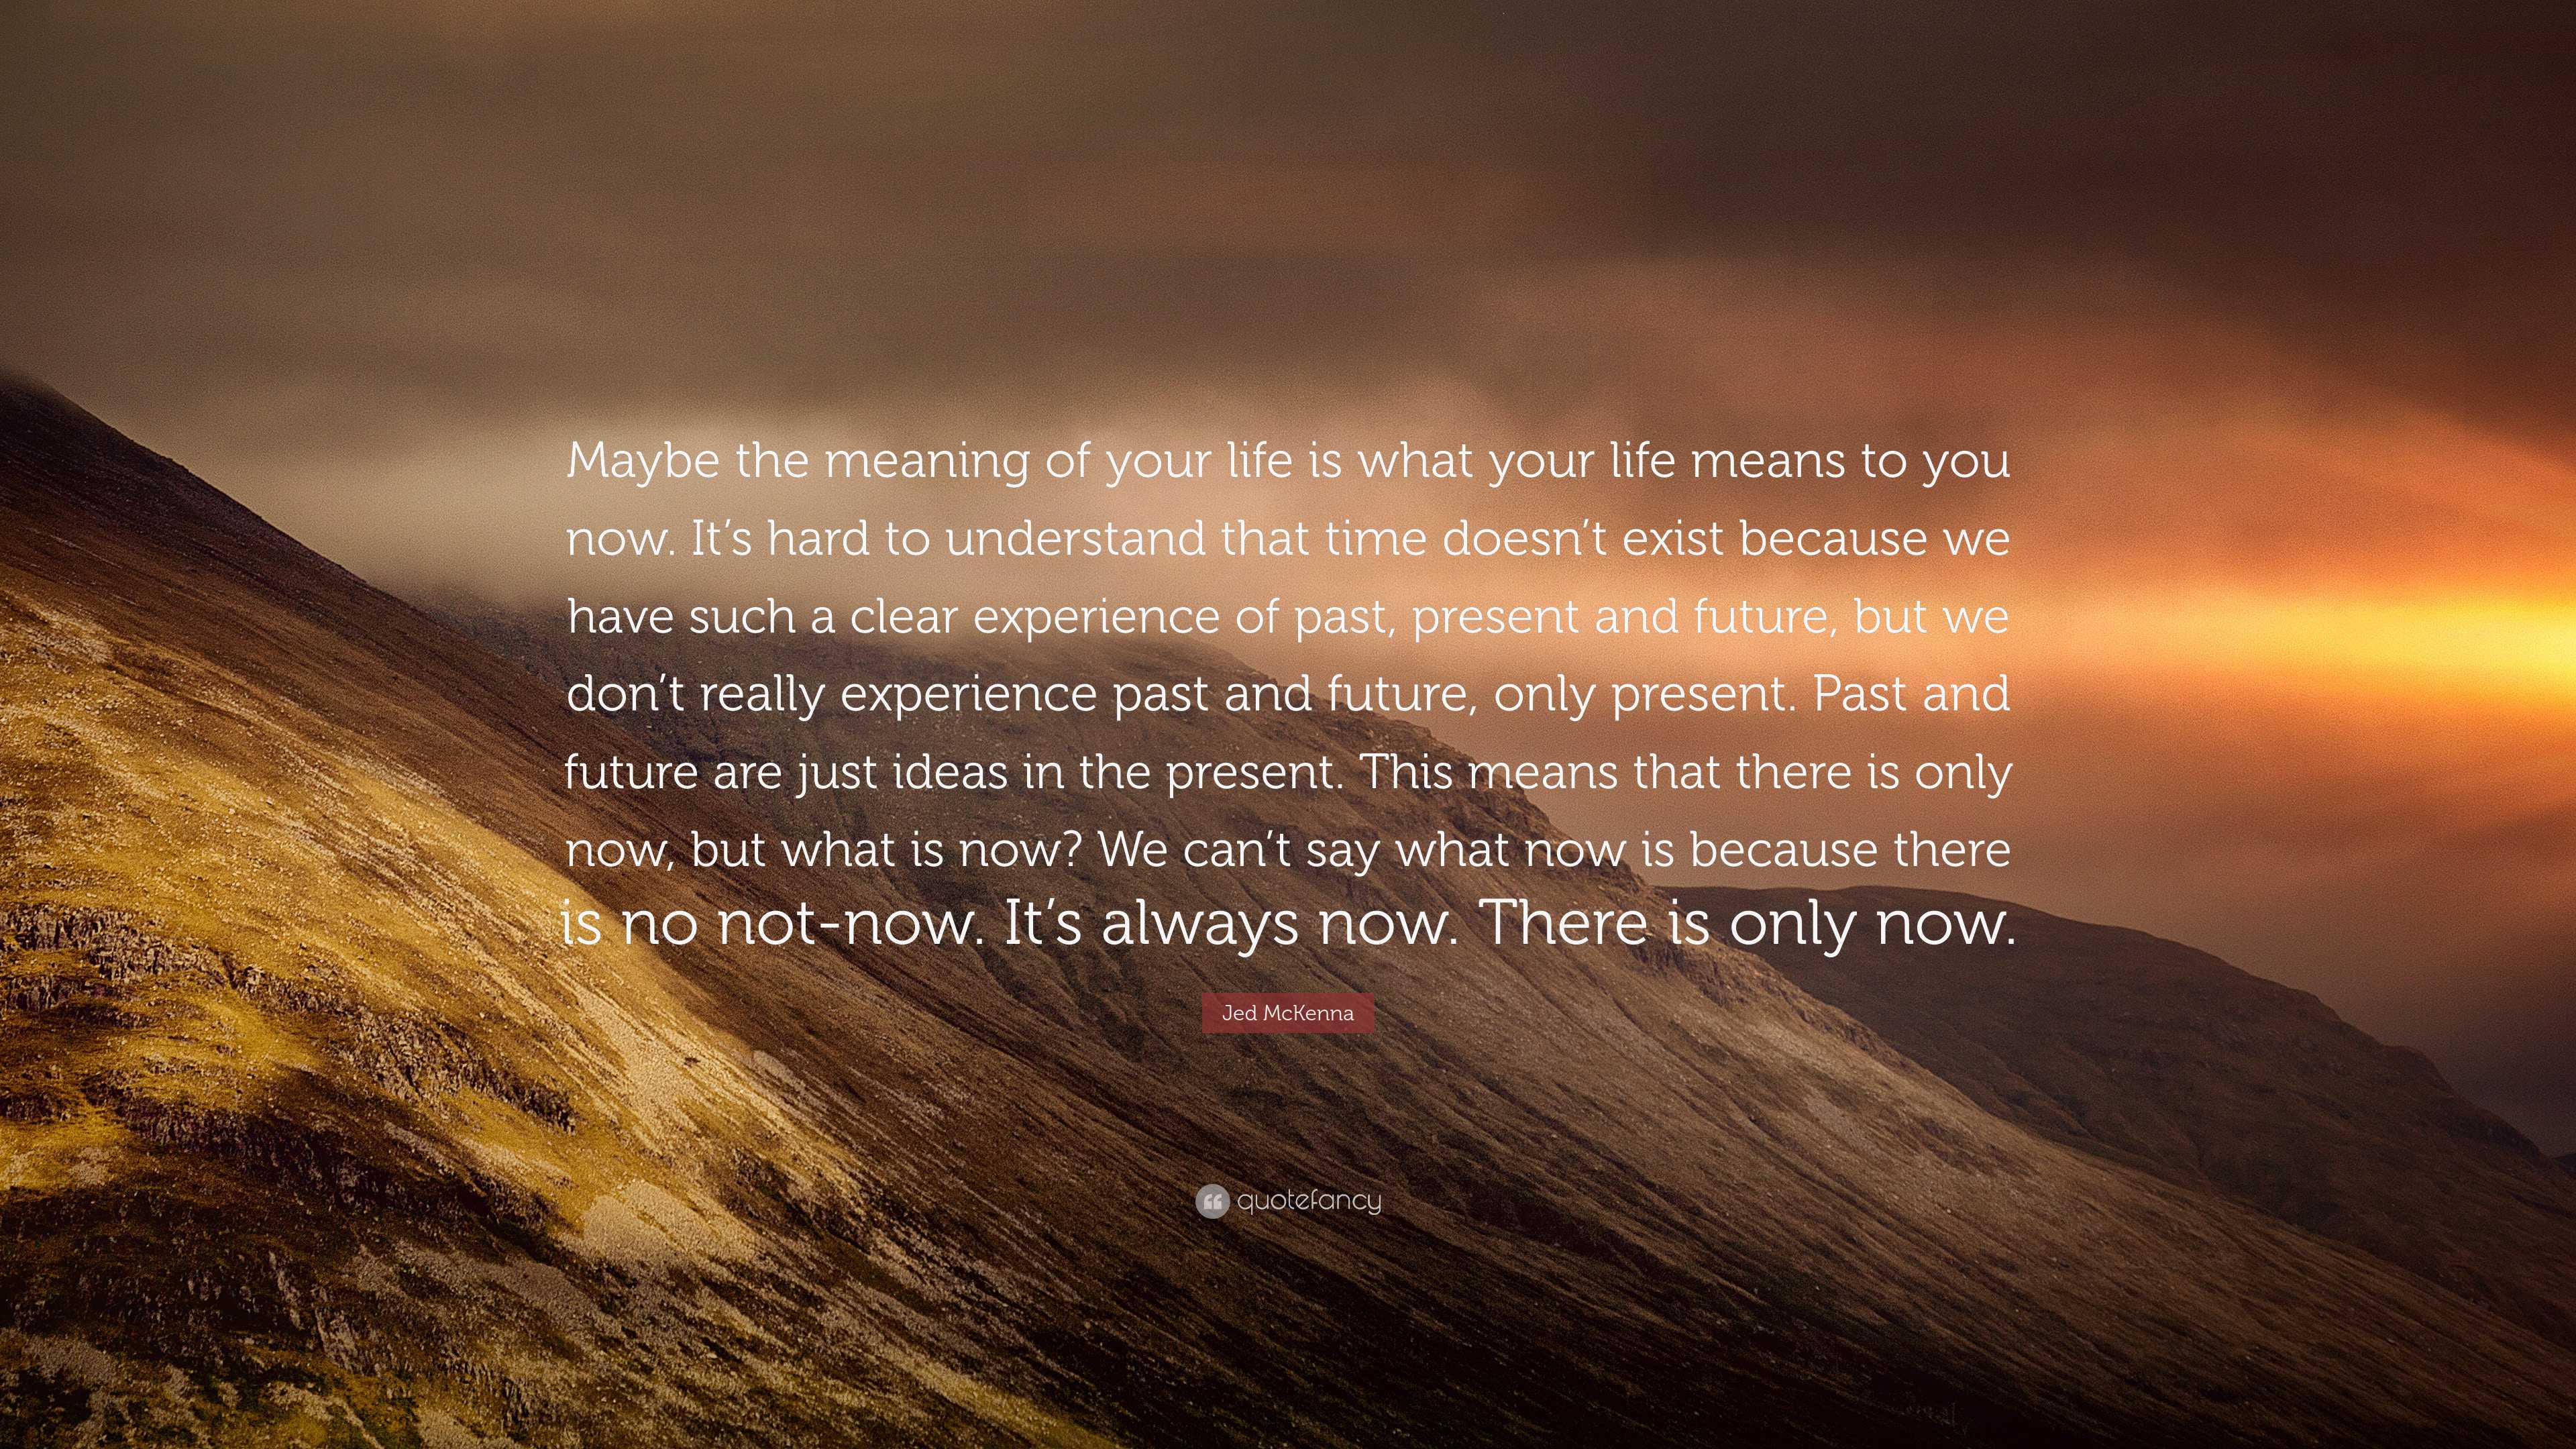 Jed McKenna Quote: “Maybe the meaning of your life is what your